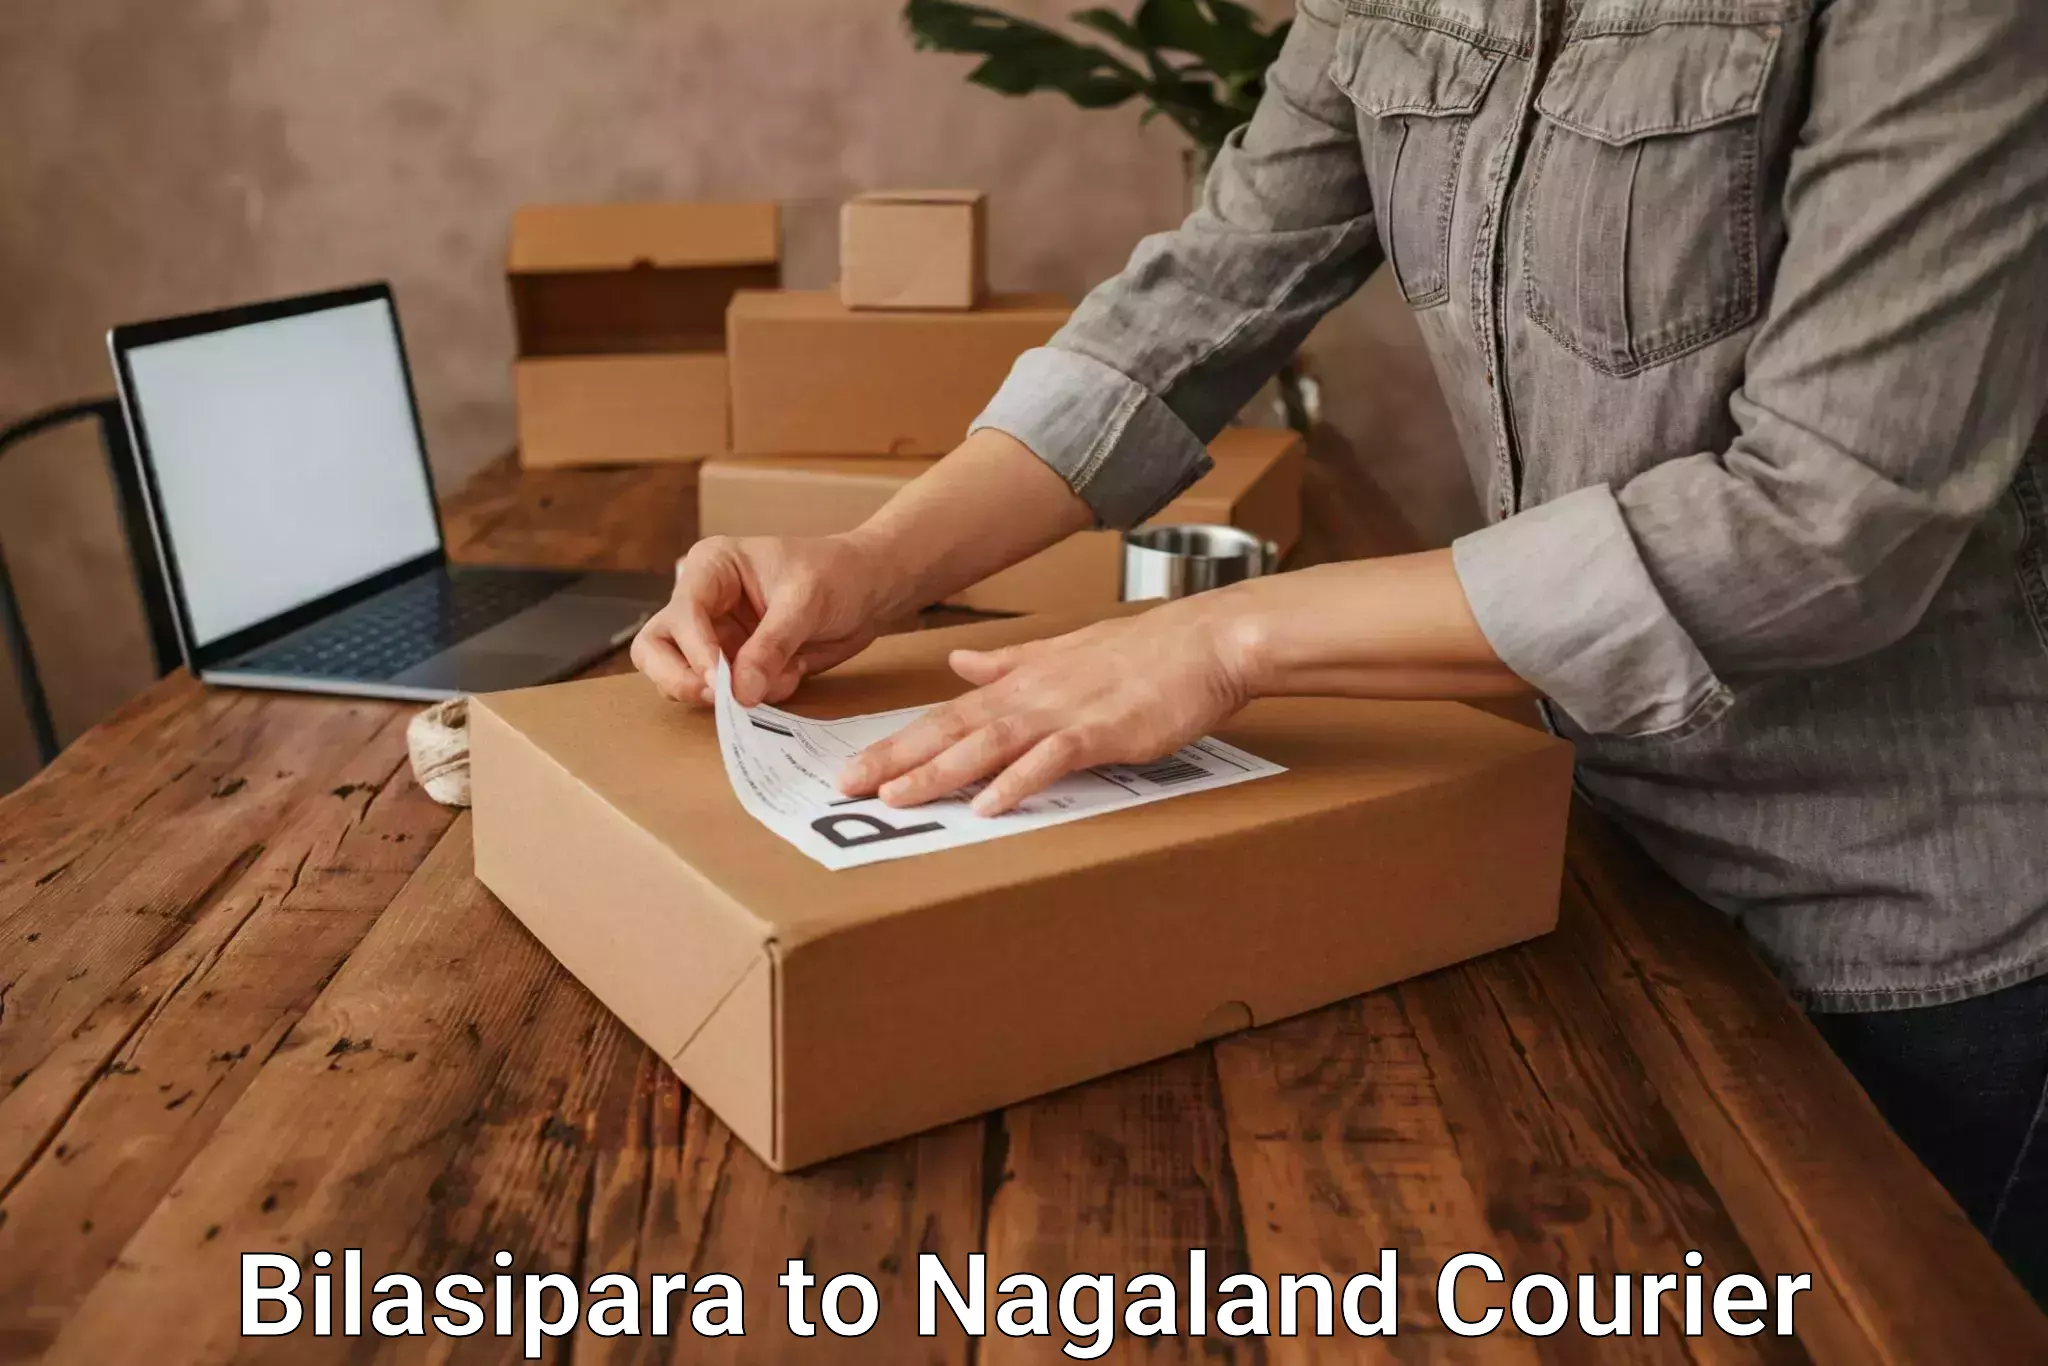 Courier service comparison in Bilasipara to Nagaland